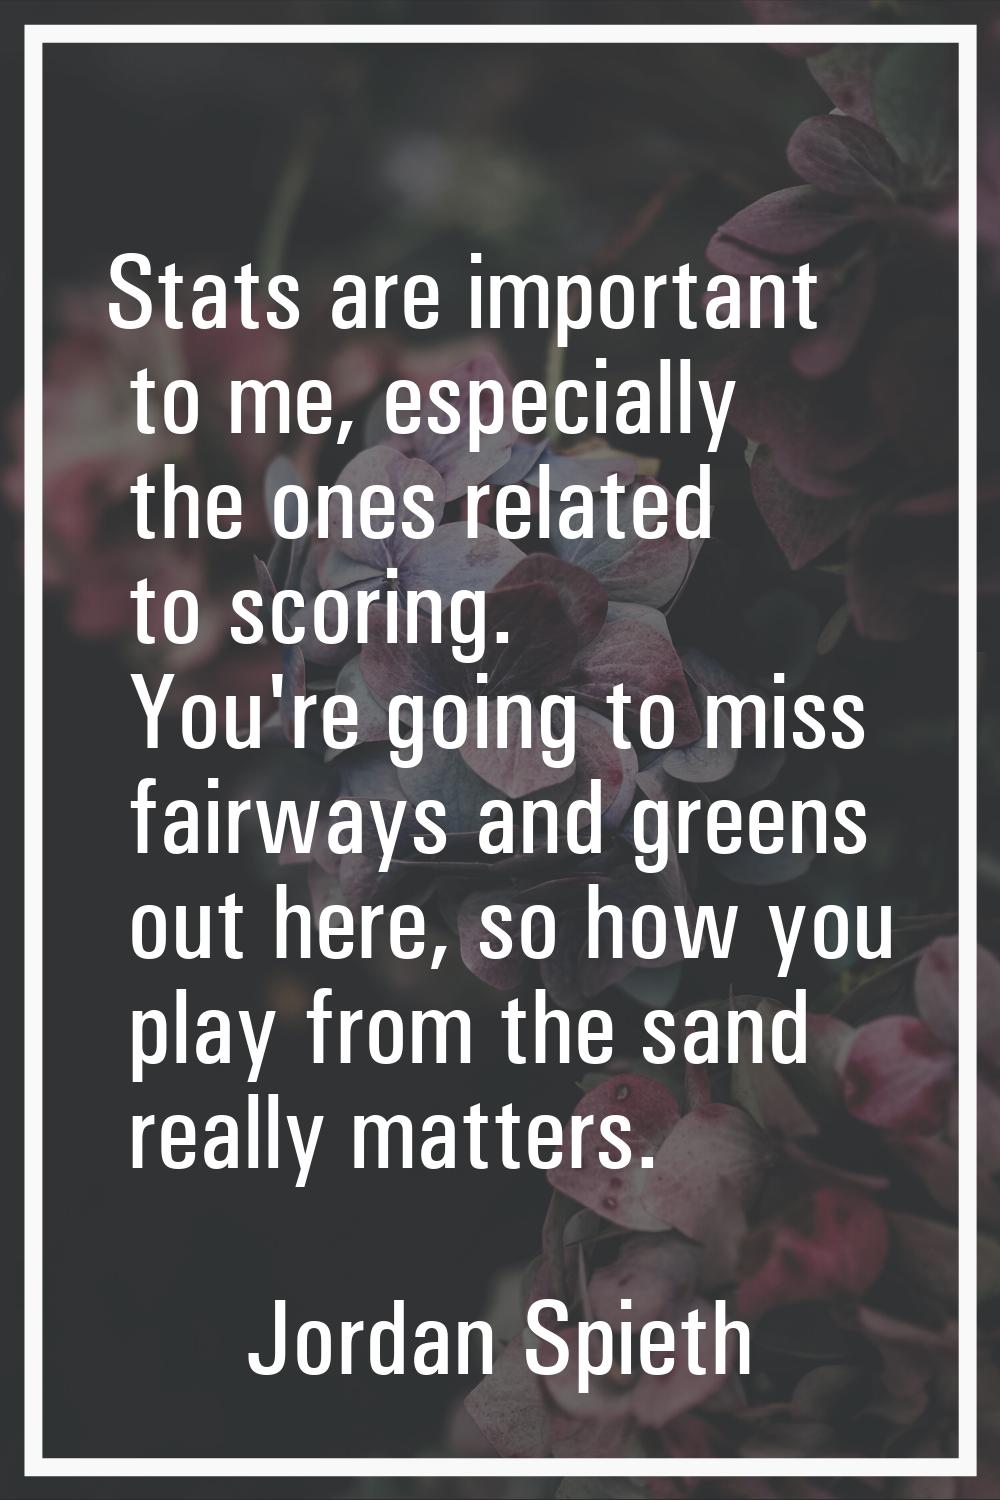 Stats are important to me, especially the ones related to scoring. You're going to miss fairways an